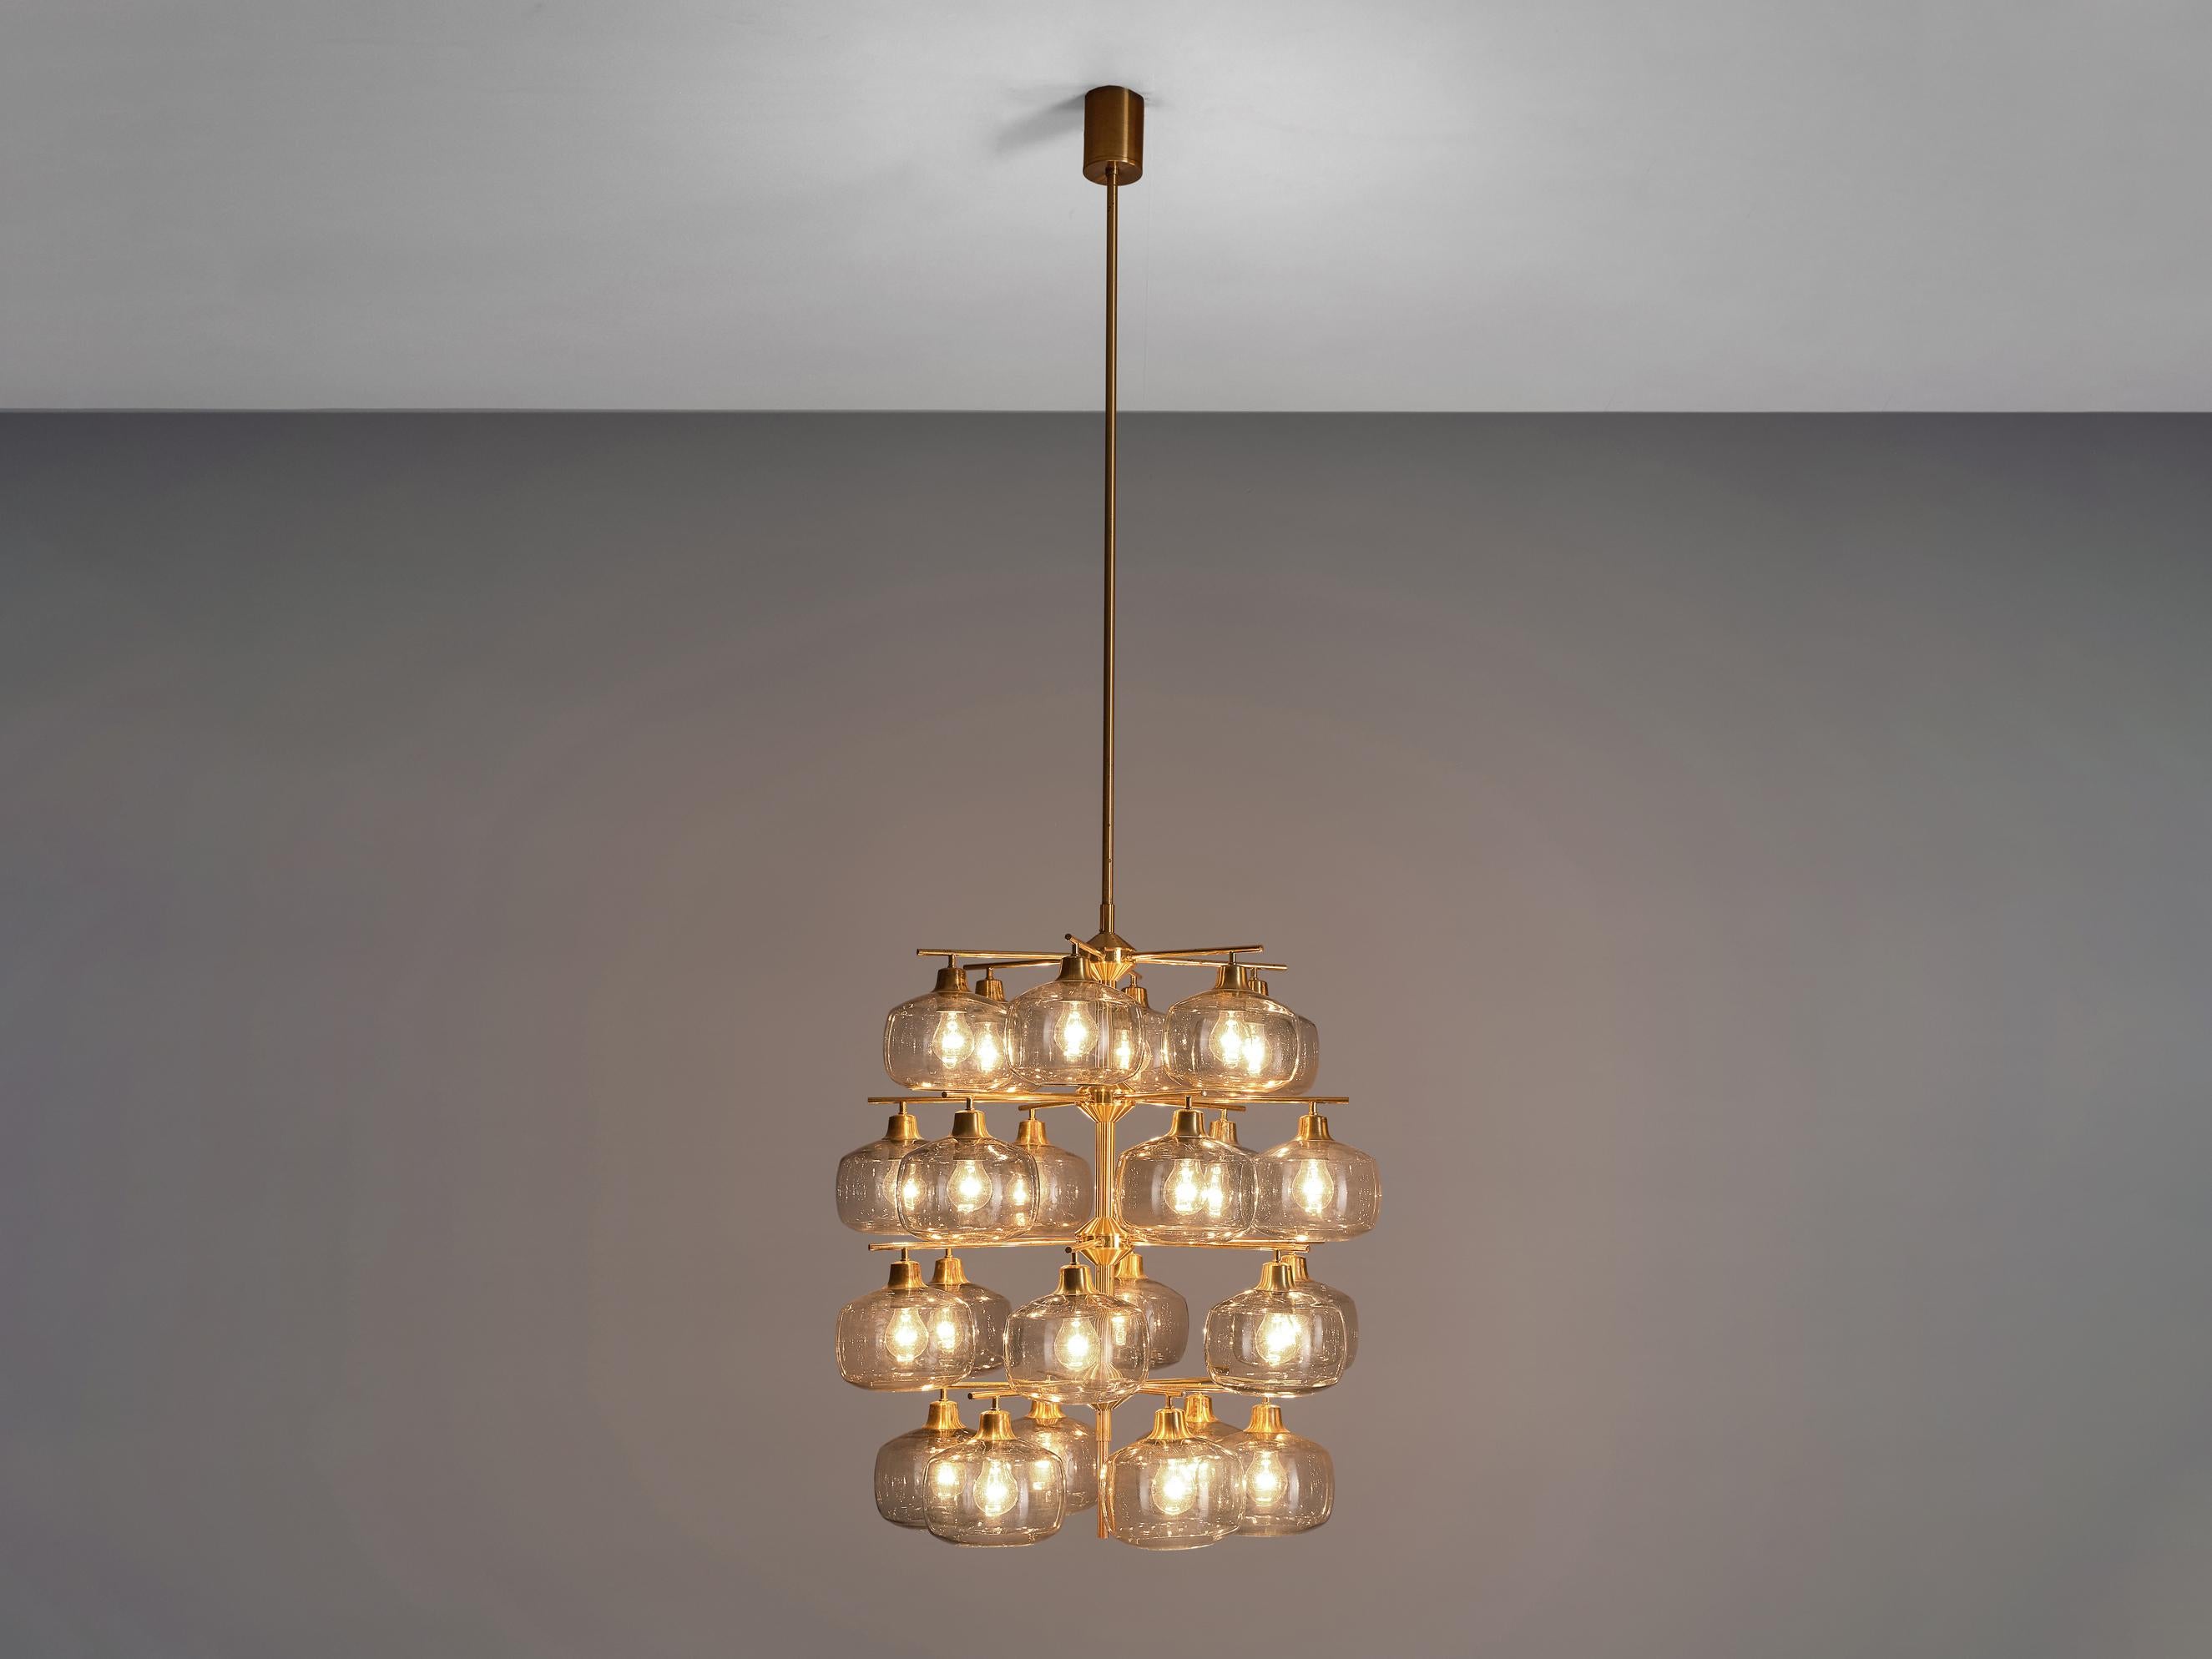 Mid-20th Century Pair of Swedish Chandeliers by Holger Johansson, 1952